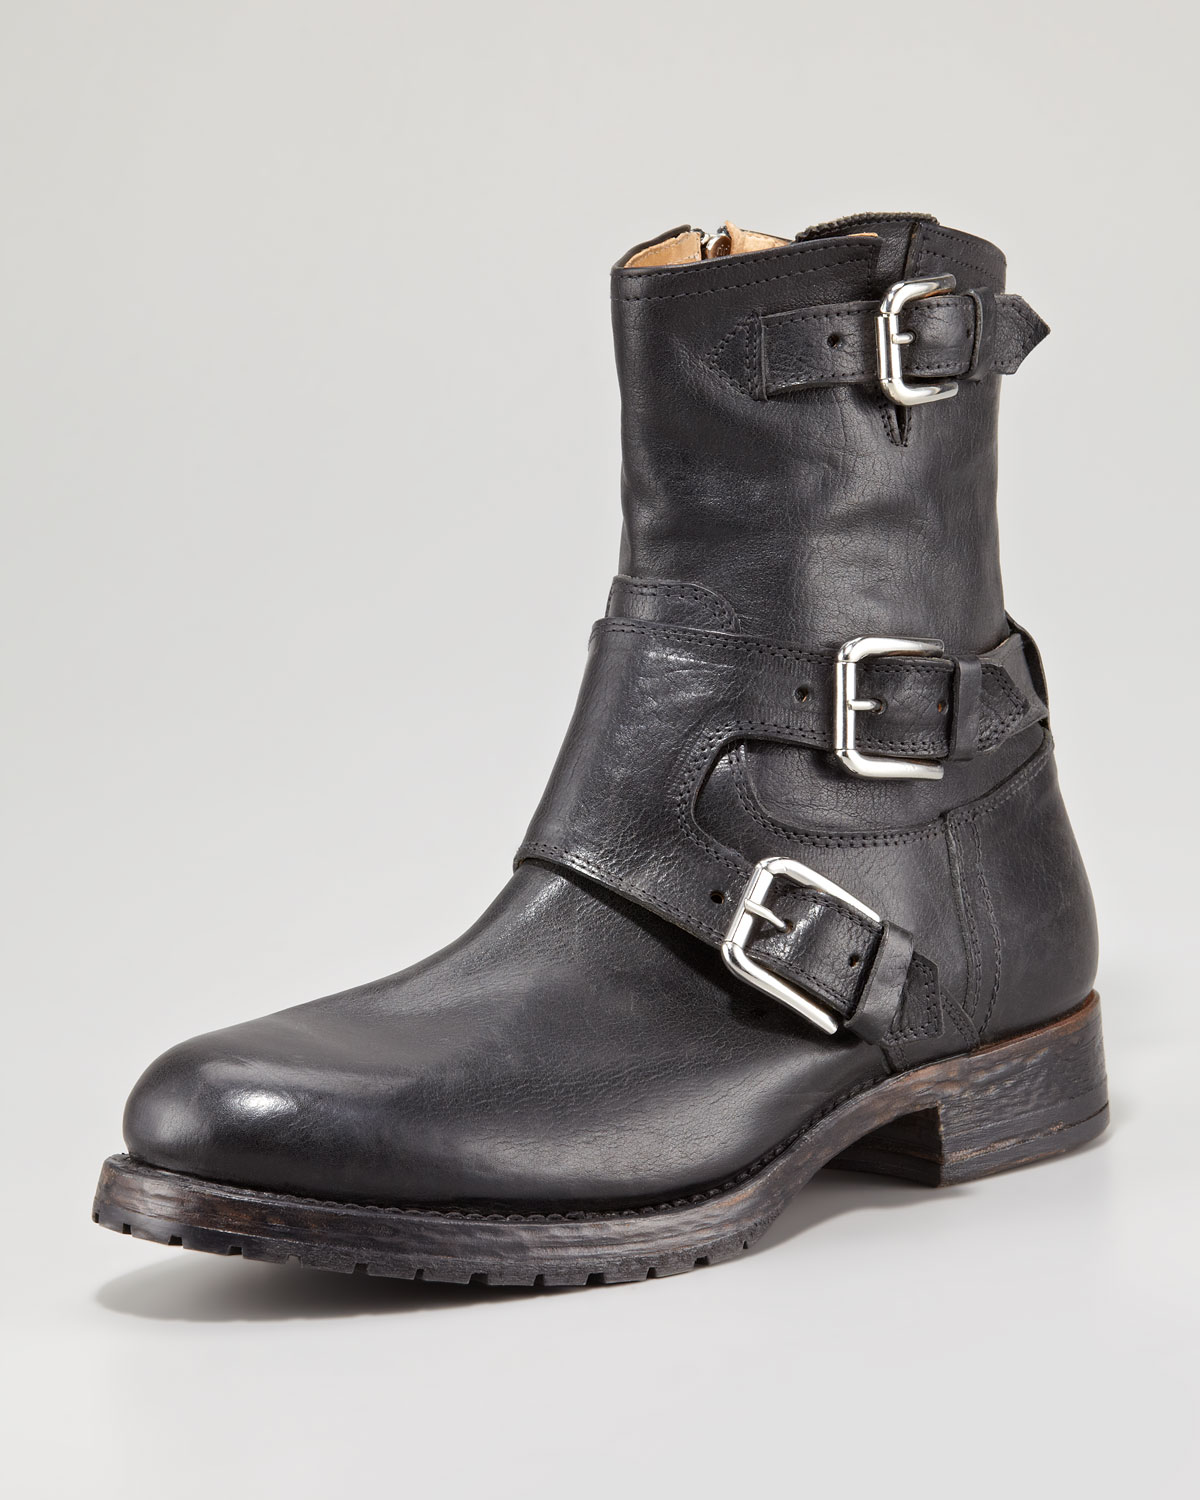 Lyst - True Religion Three Buckle Motorcycle Boot in Black for Men